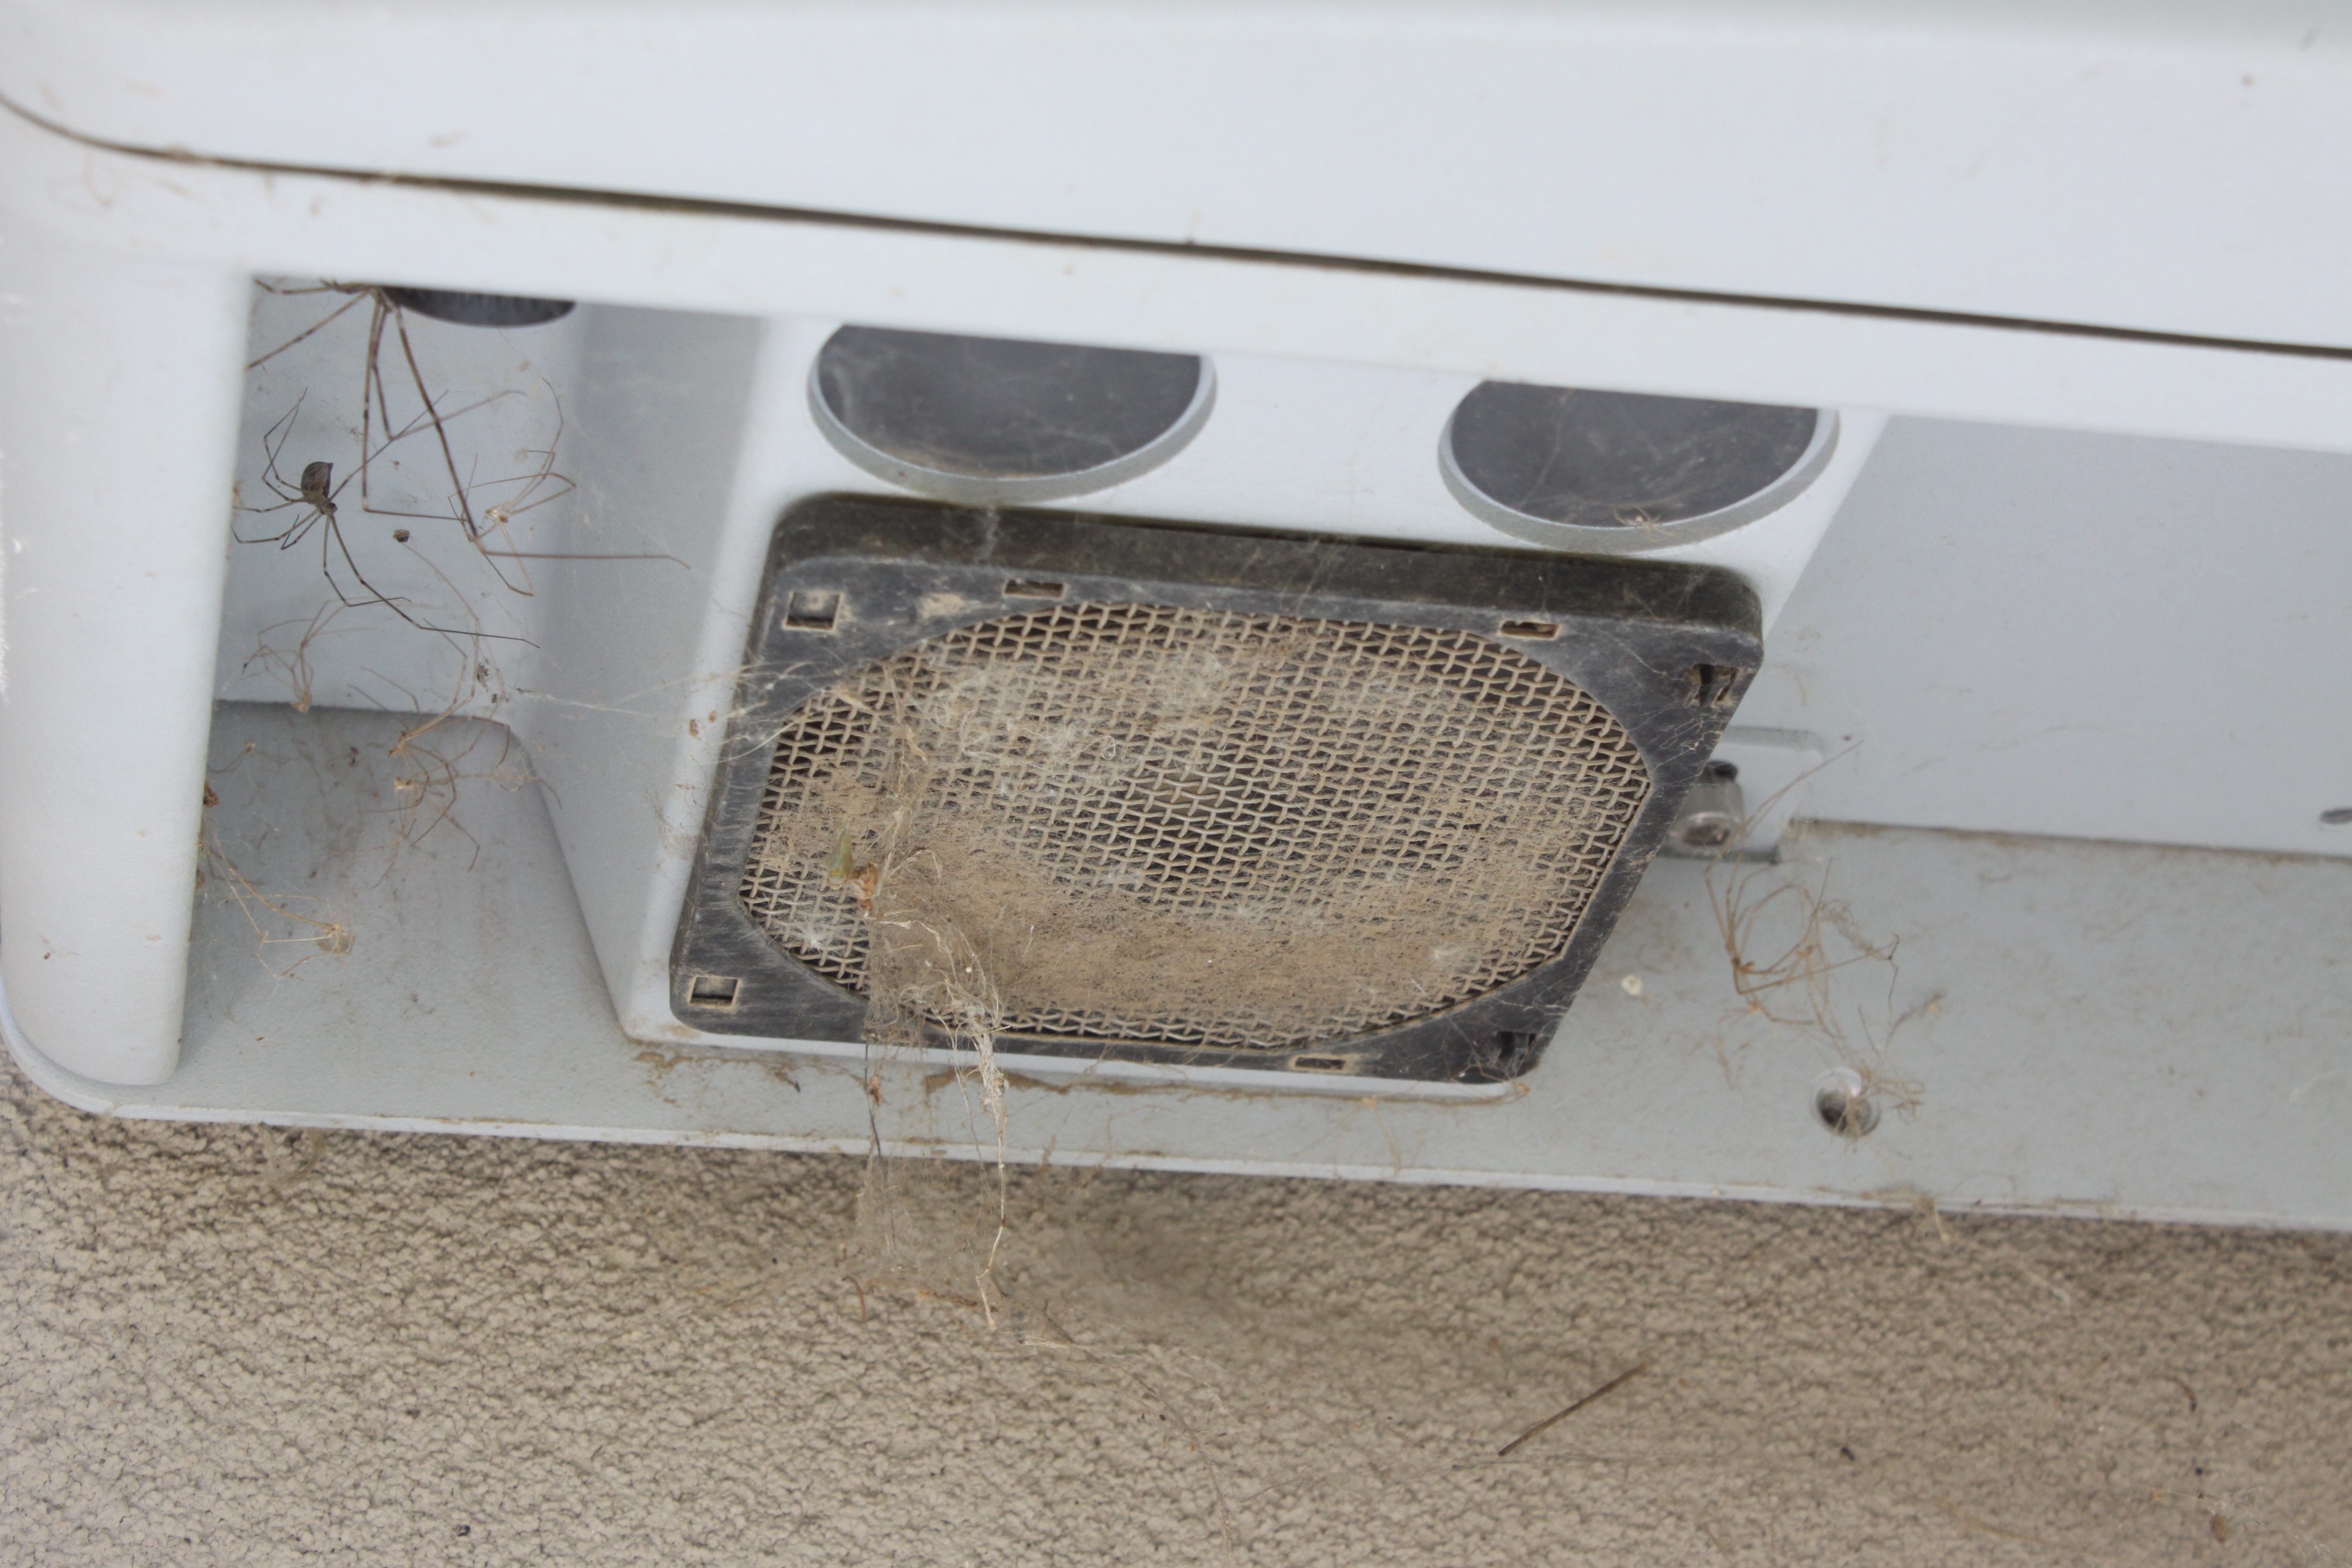 Example 2: Checking for debris on the inverter exhaust screen should be done routinely. 